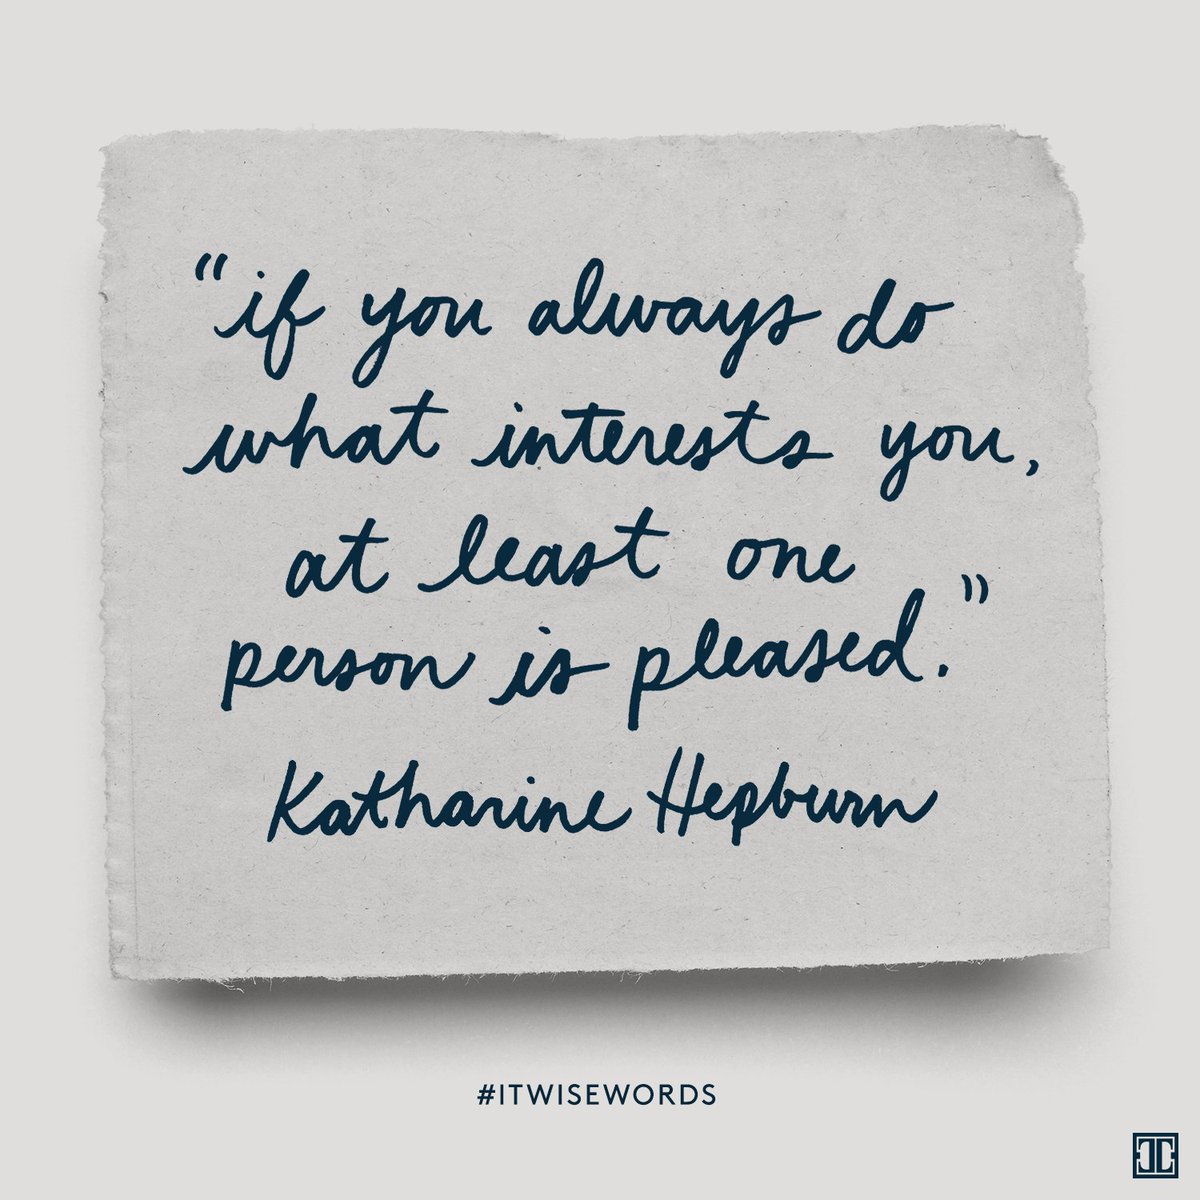 See more #ITwisewords:https://t.co/XQ0qrWUOQL #quote #inspiration #KatherineHepburn https://t.co/h35fV4zC5f